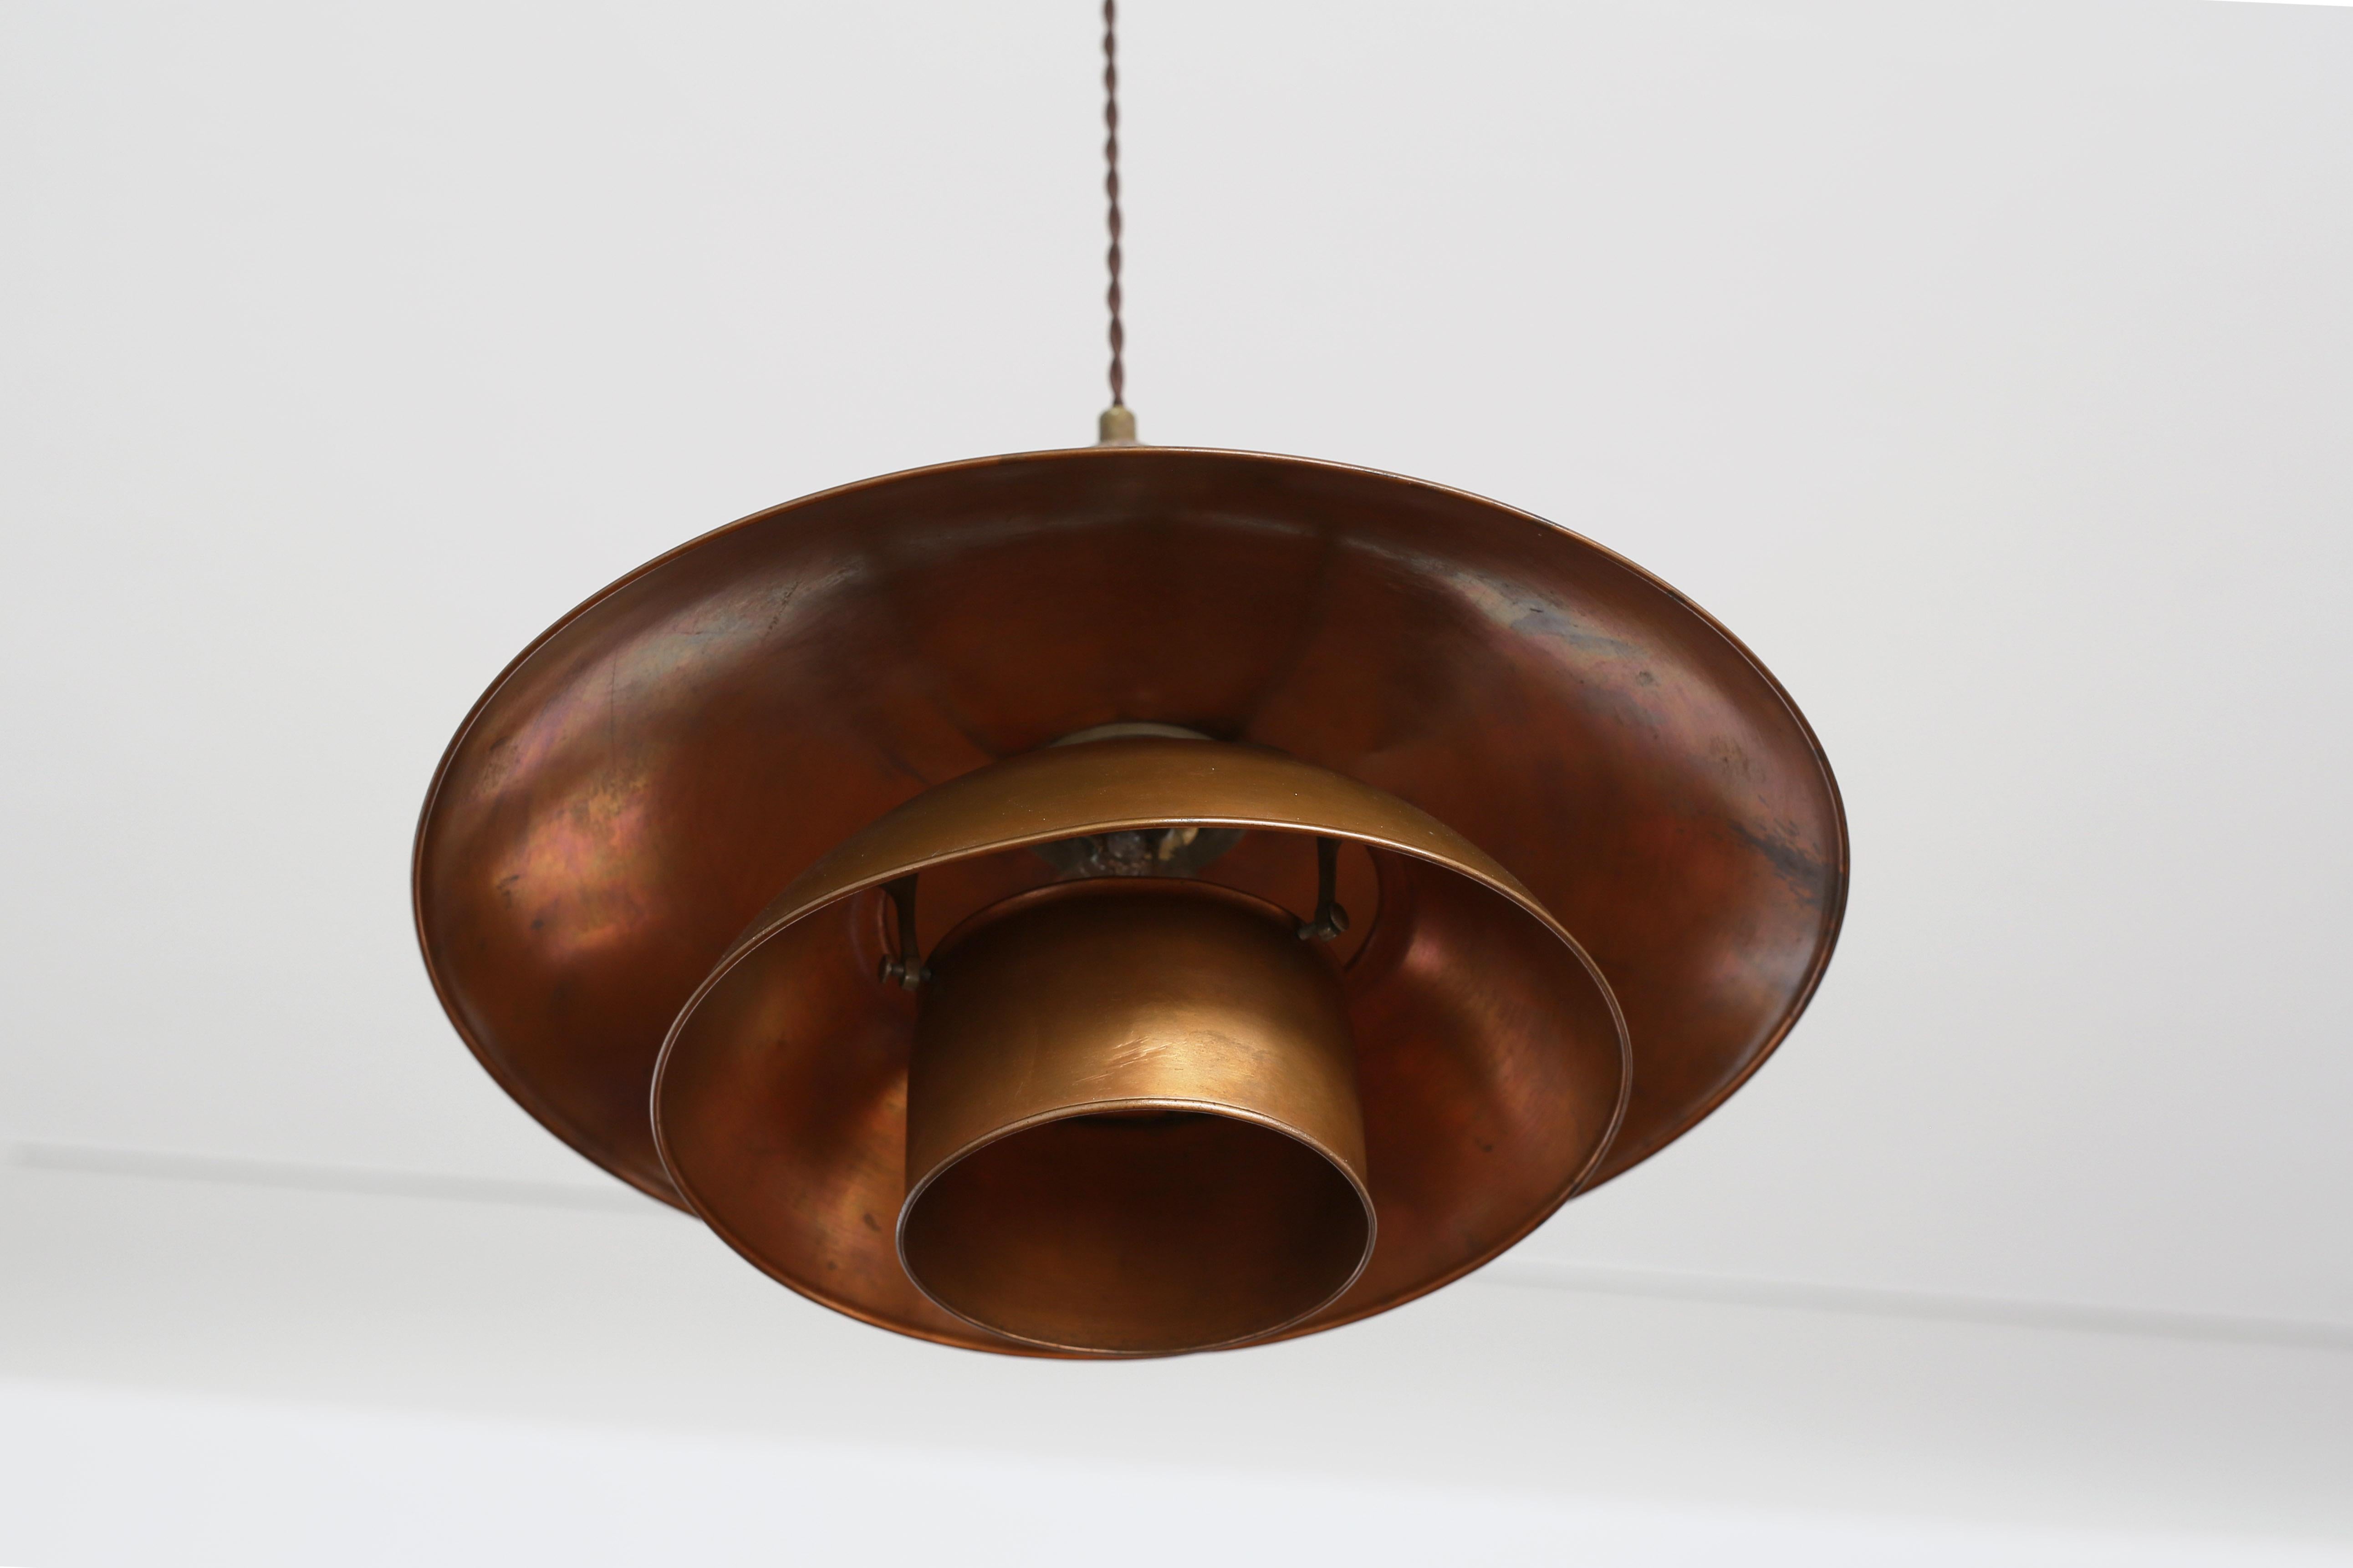 Rare and very early Poul Henningsen 4/4 Ceiling lamp in Copper and Nickel plated Steel. 

Designed by Poul Henningsen 1926 and made by Louis Poulsen, Denmark the same year in the short period before the patent application.  

Provenance; Previously